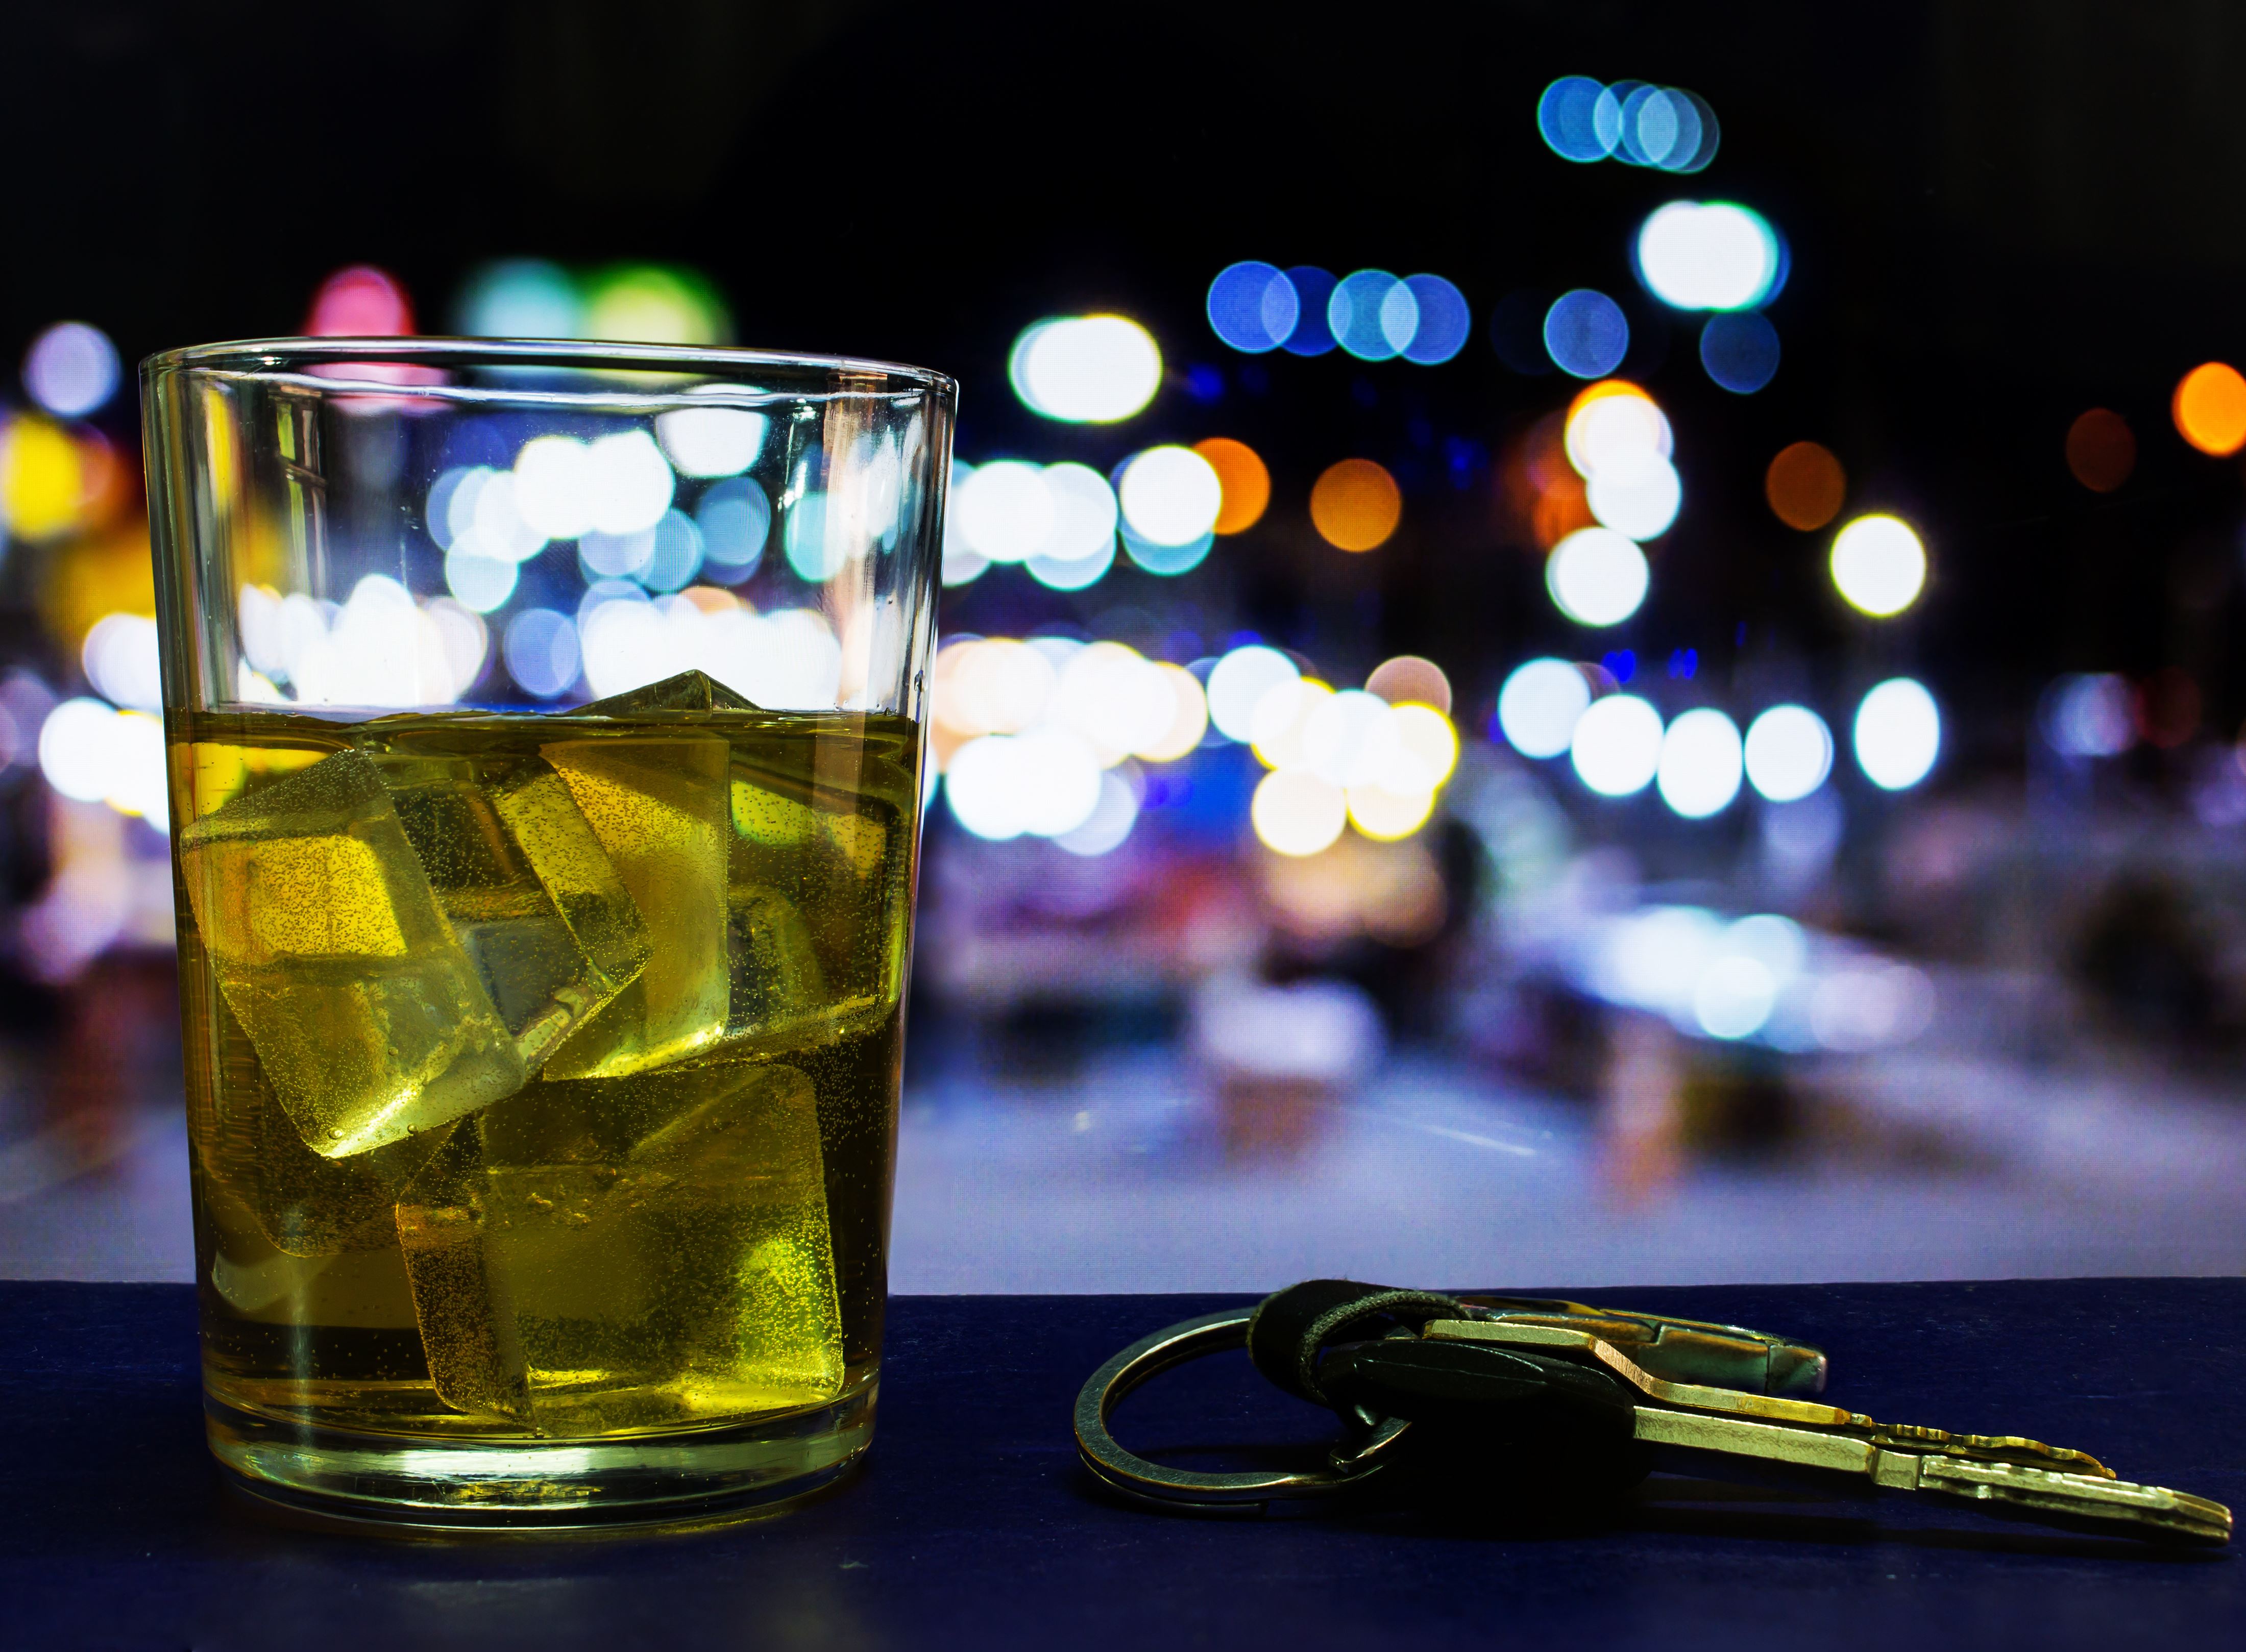 Whiskey & keys before a DUI in California